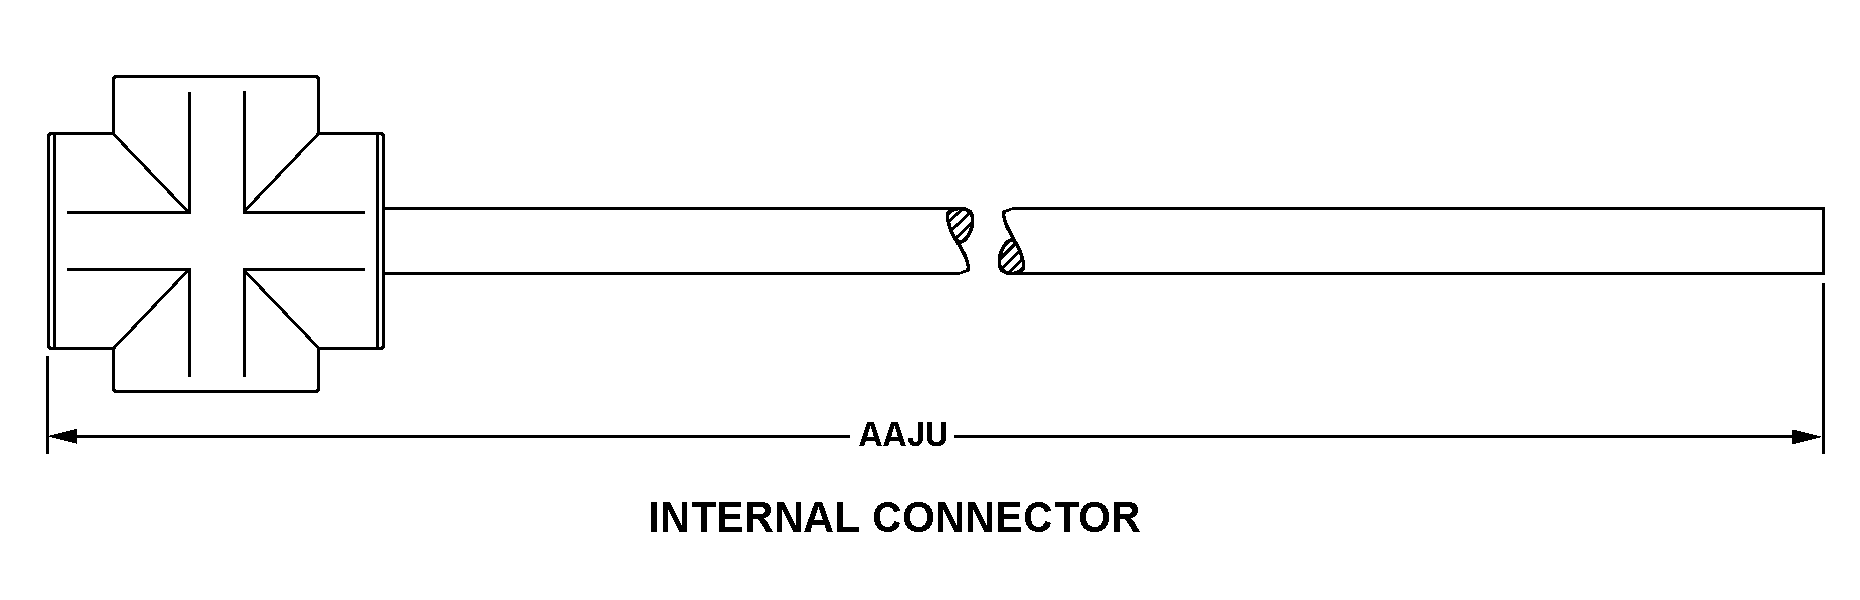 INTERNAL CONNECTOR style nsn 5995-01-477-8028